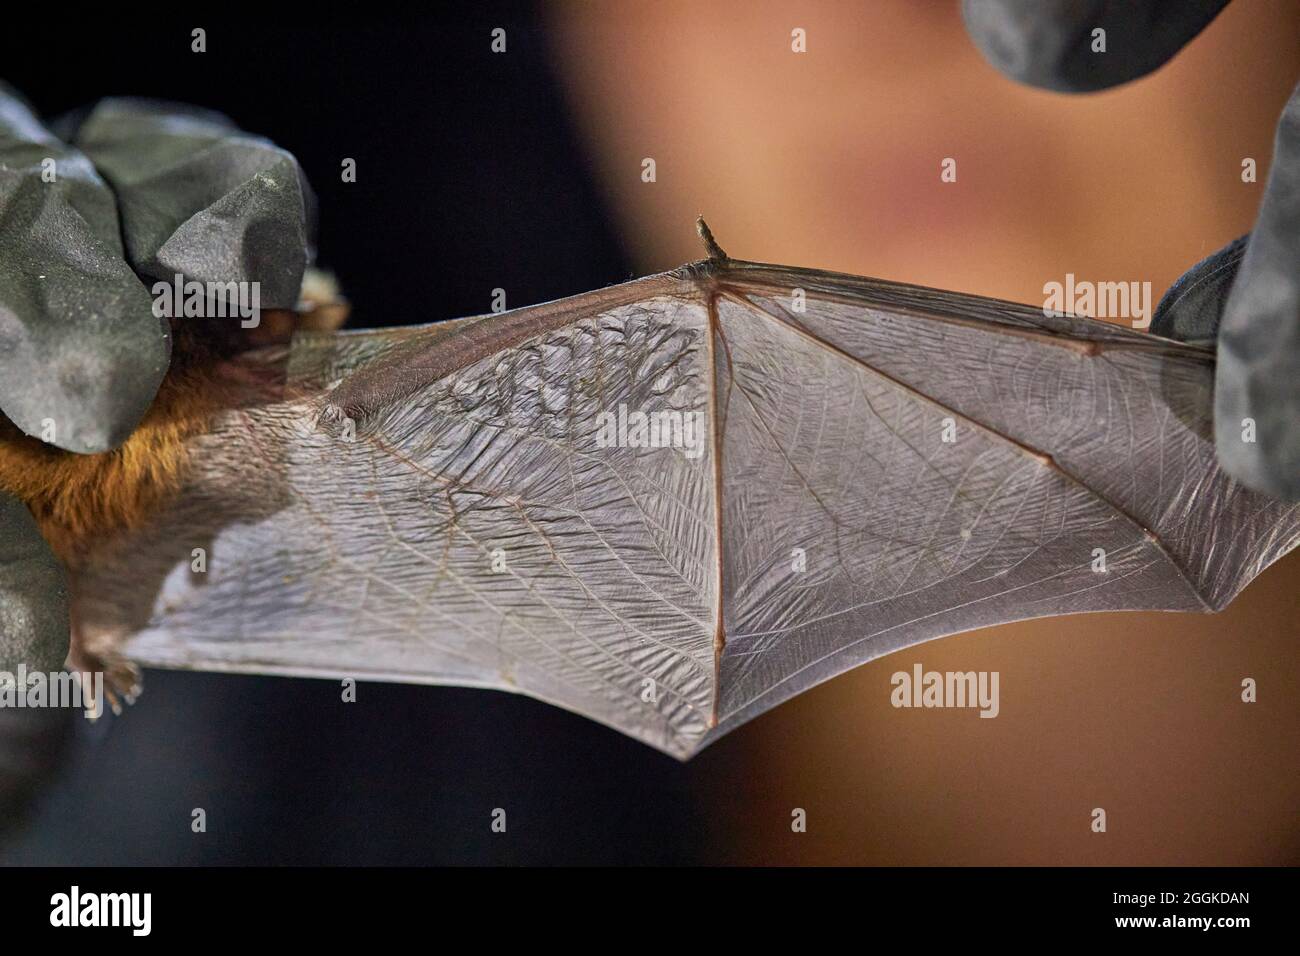 Bat, wings, spread, research Stock Photo